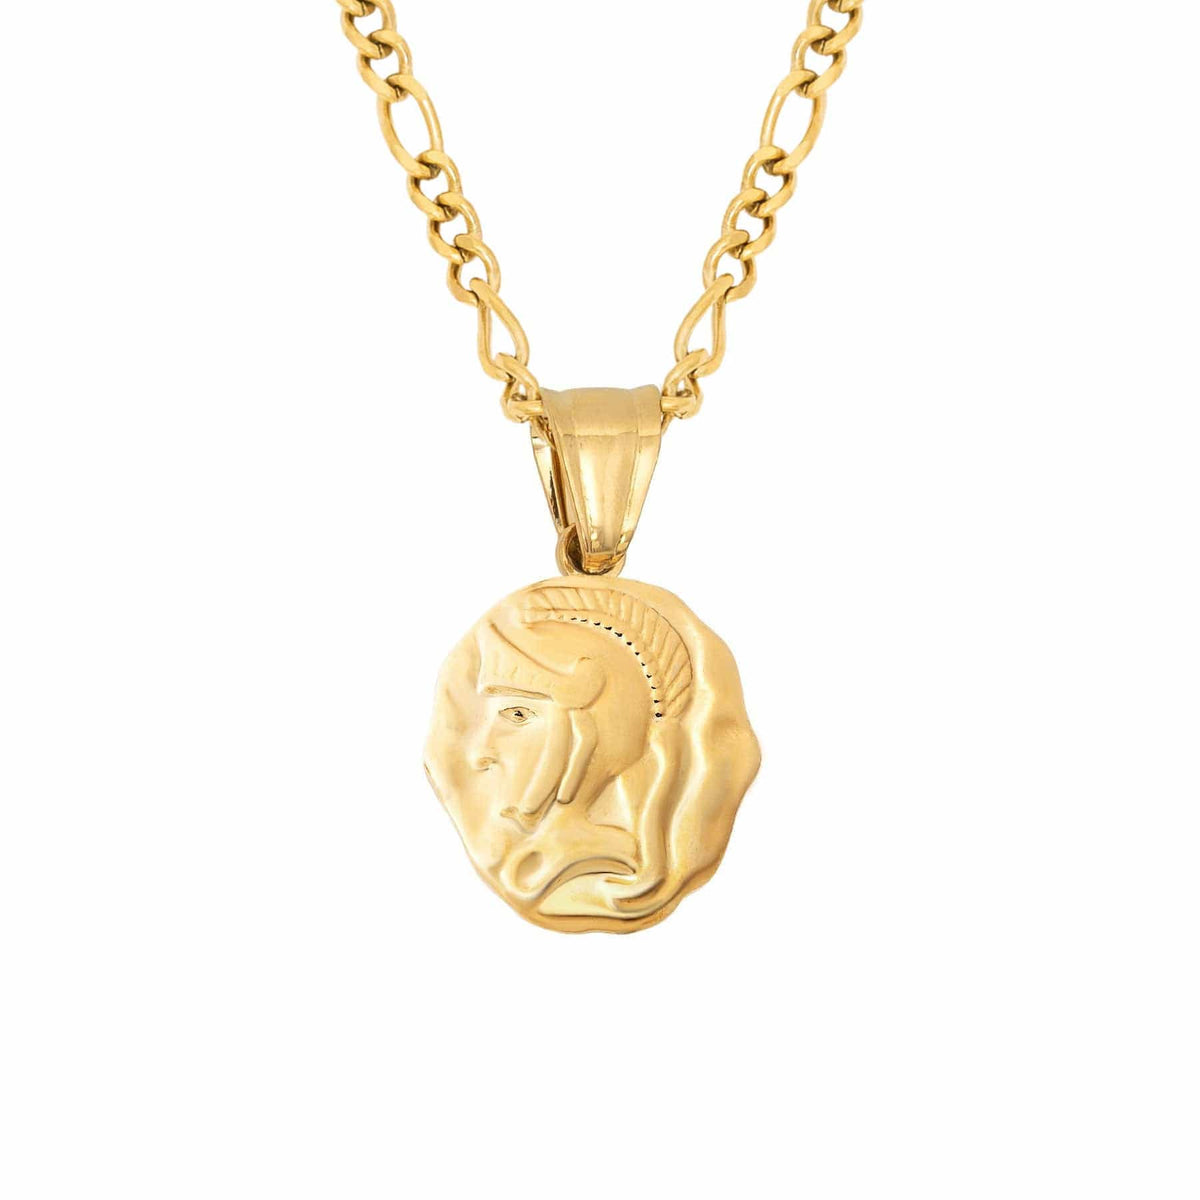 BohoMoon Stainless Steel Rome Coin Necklace Gold